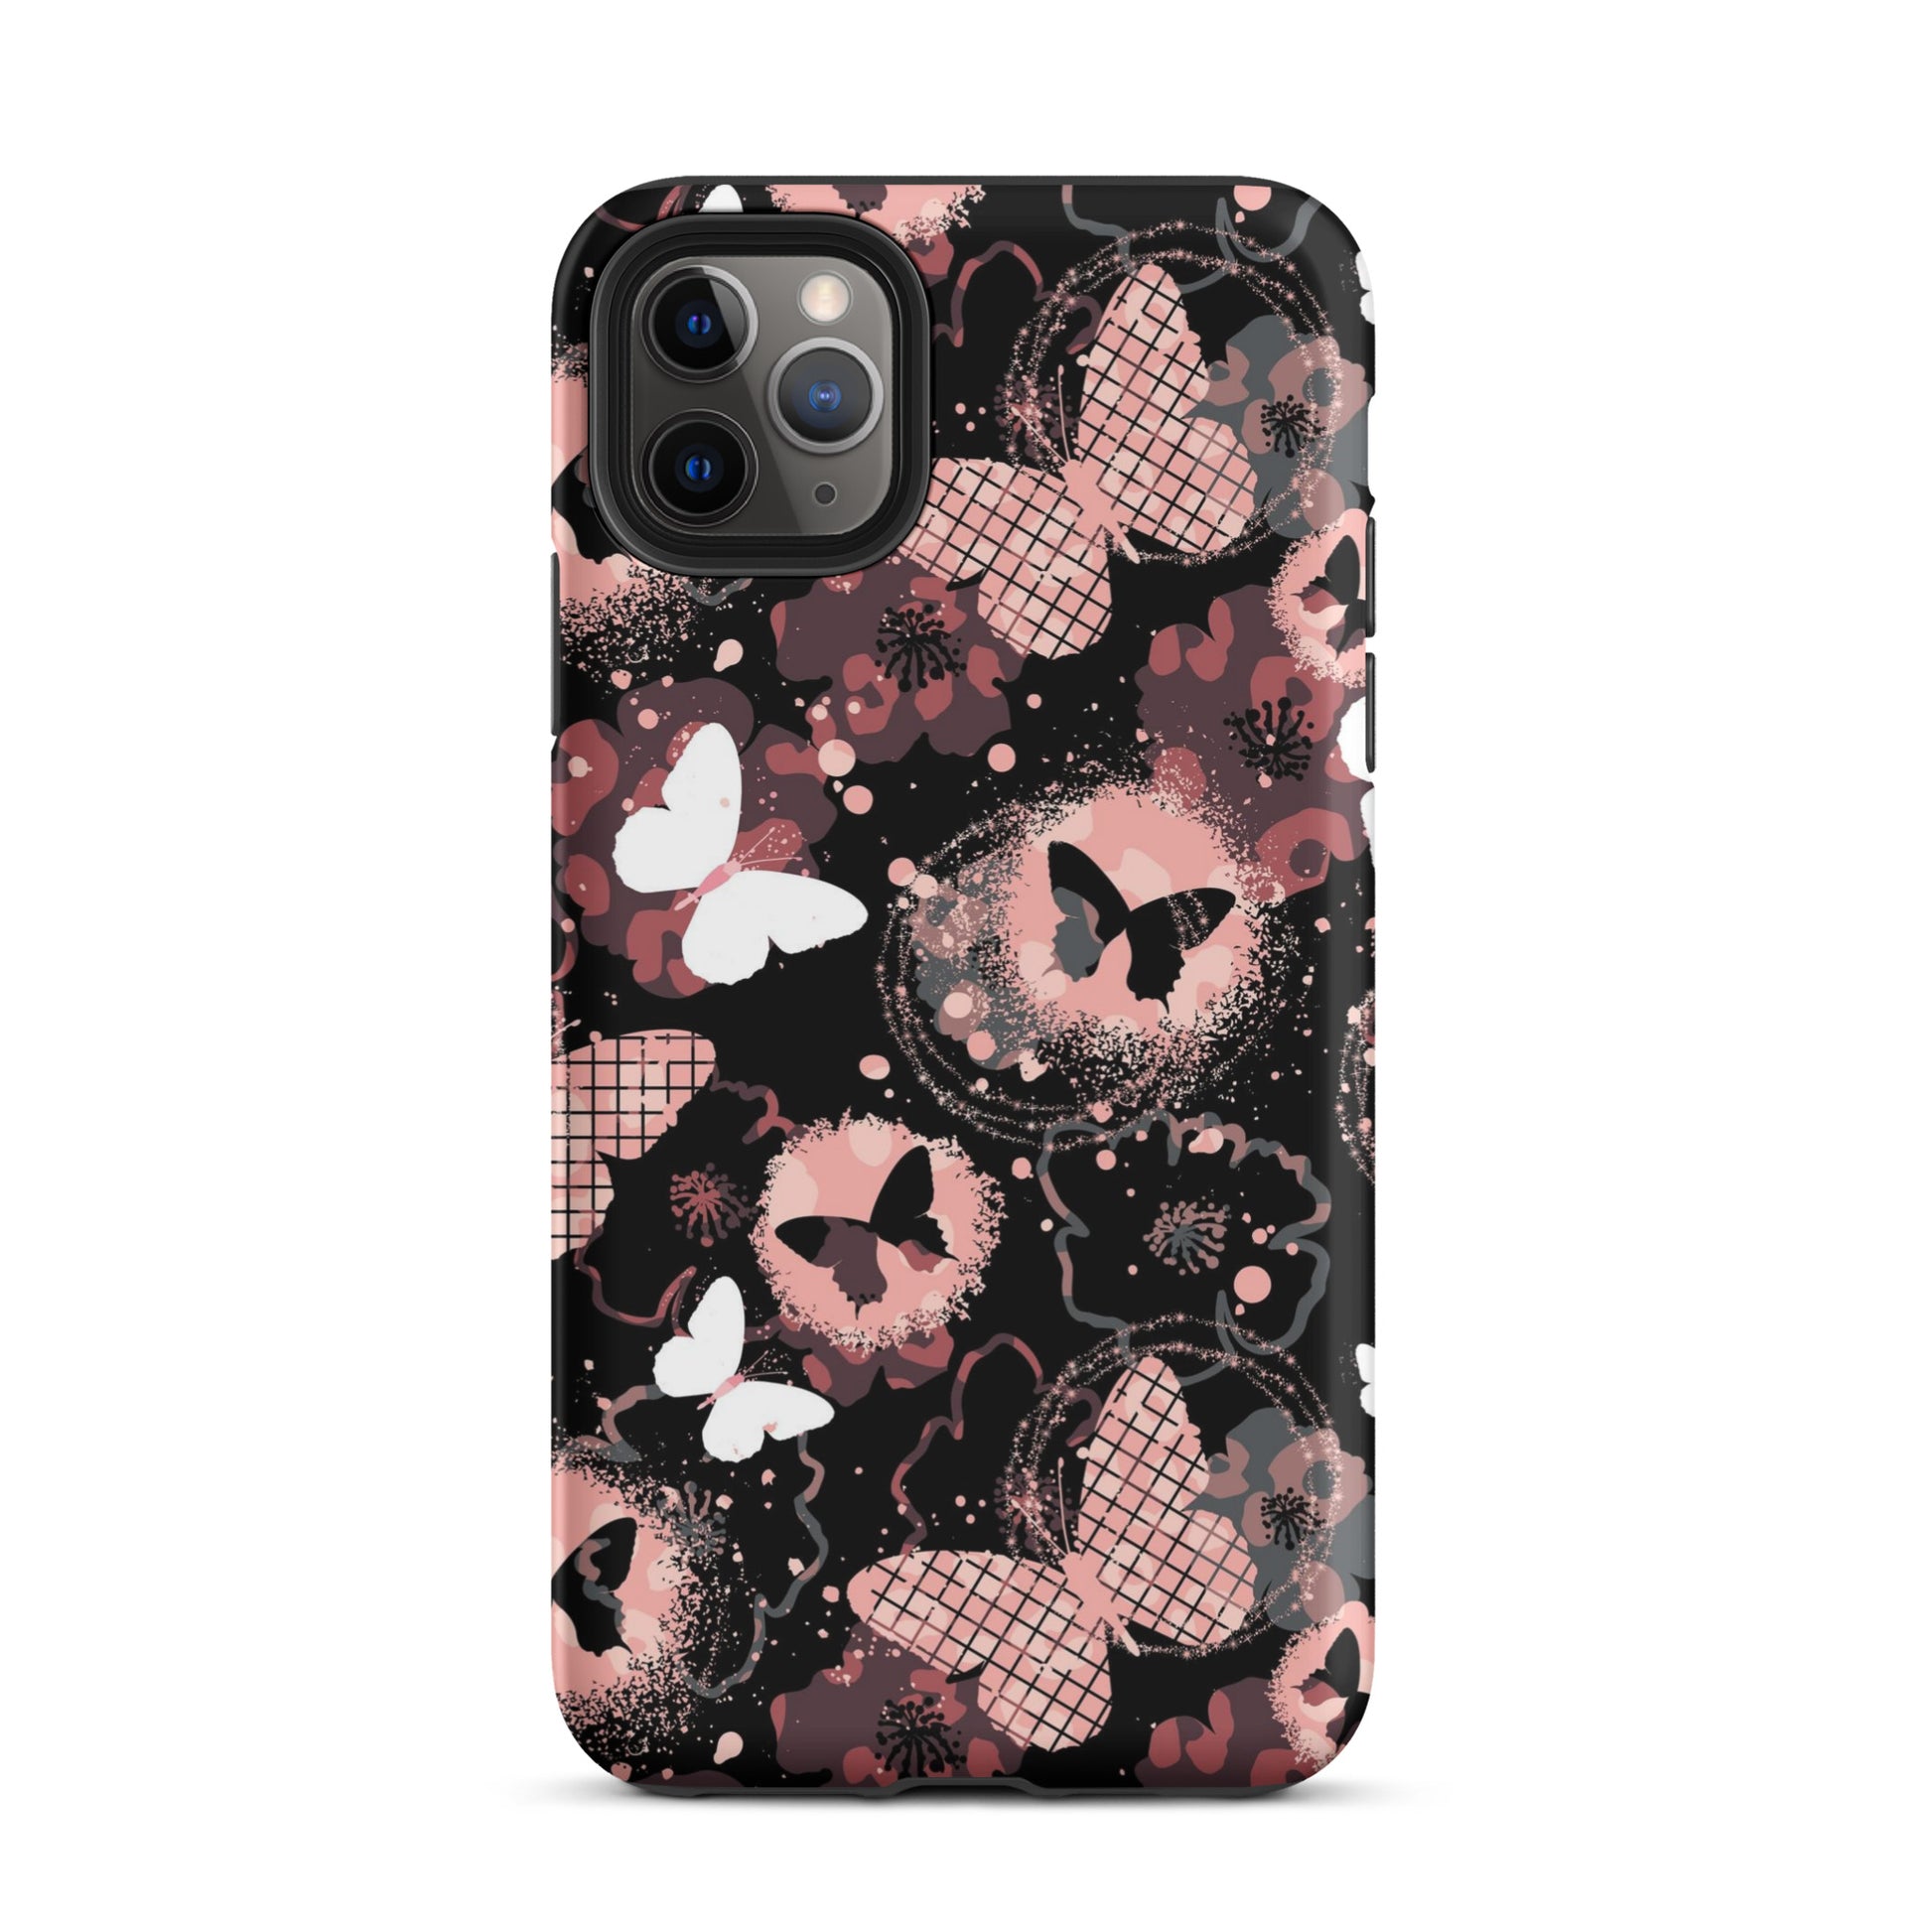 Butterfly Energy iPhone Case Matte iPhone 11 Pro Max